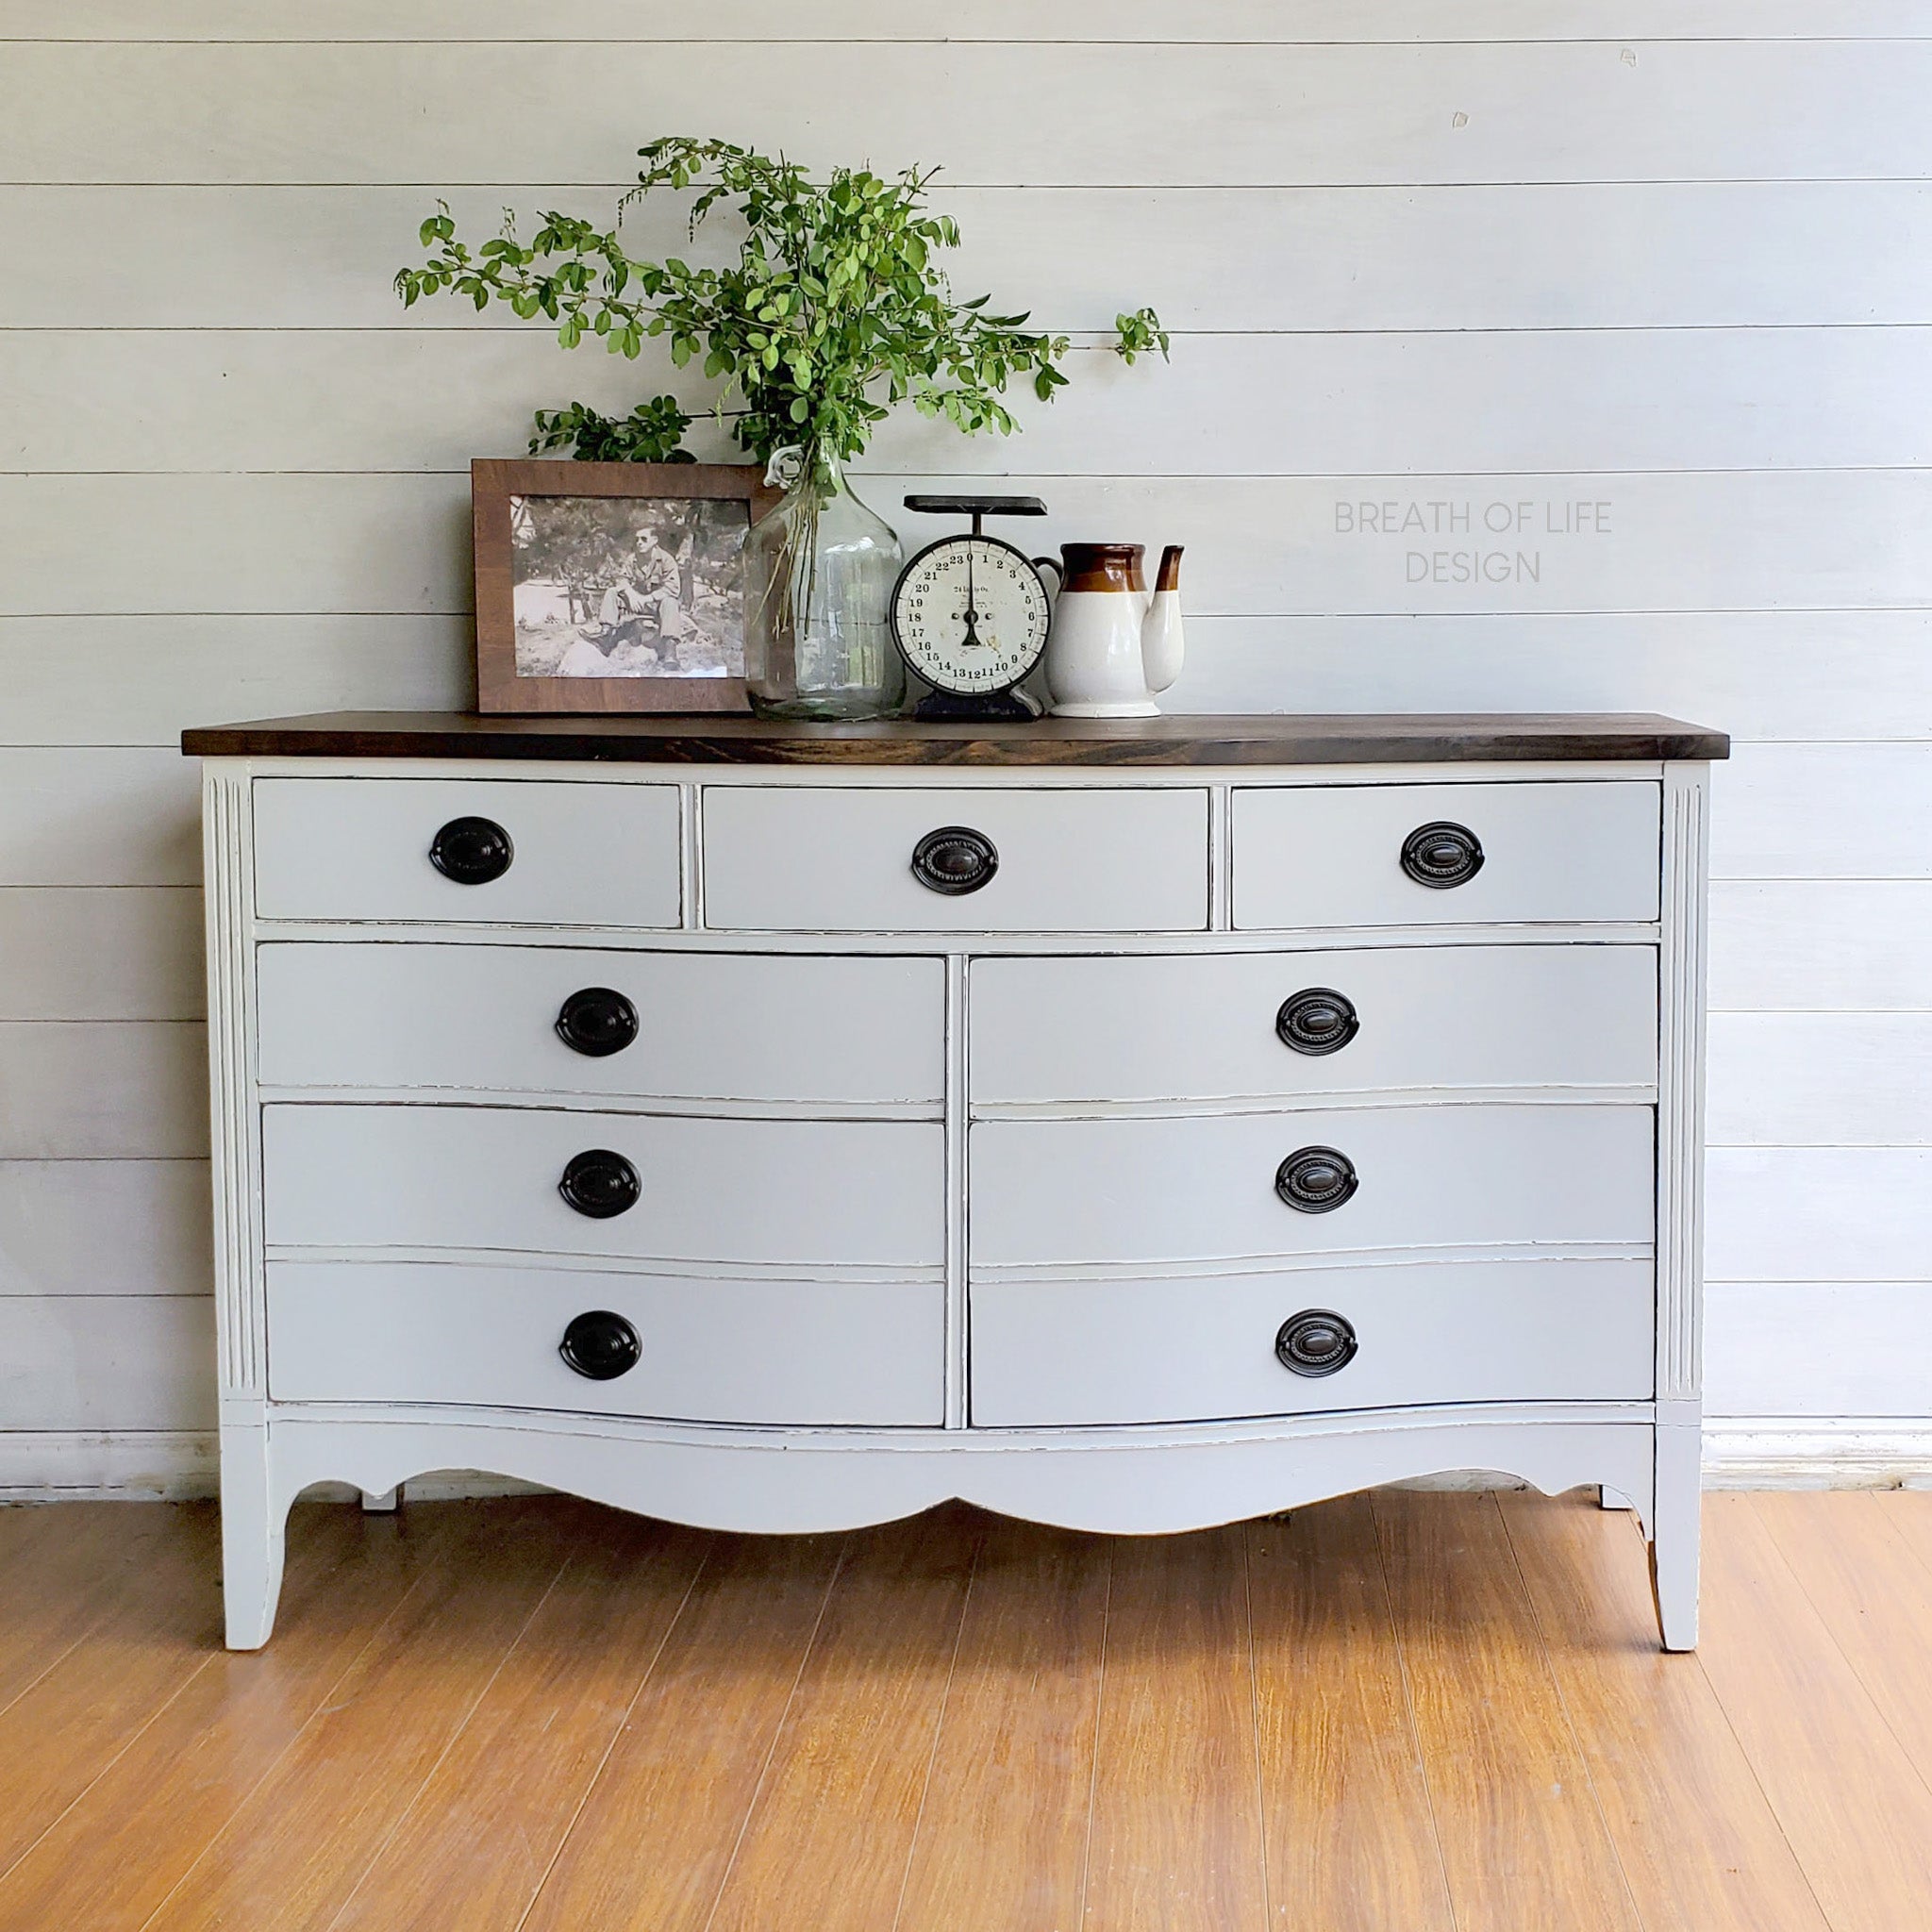 A vintage large dresser refurbished by Breath of Life Design is painted in Dixie Belle's Driftwood chalk mineral paint and has a natural dark wood top on it.